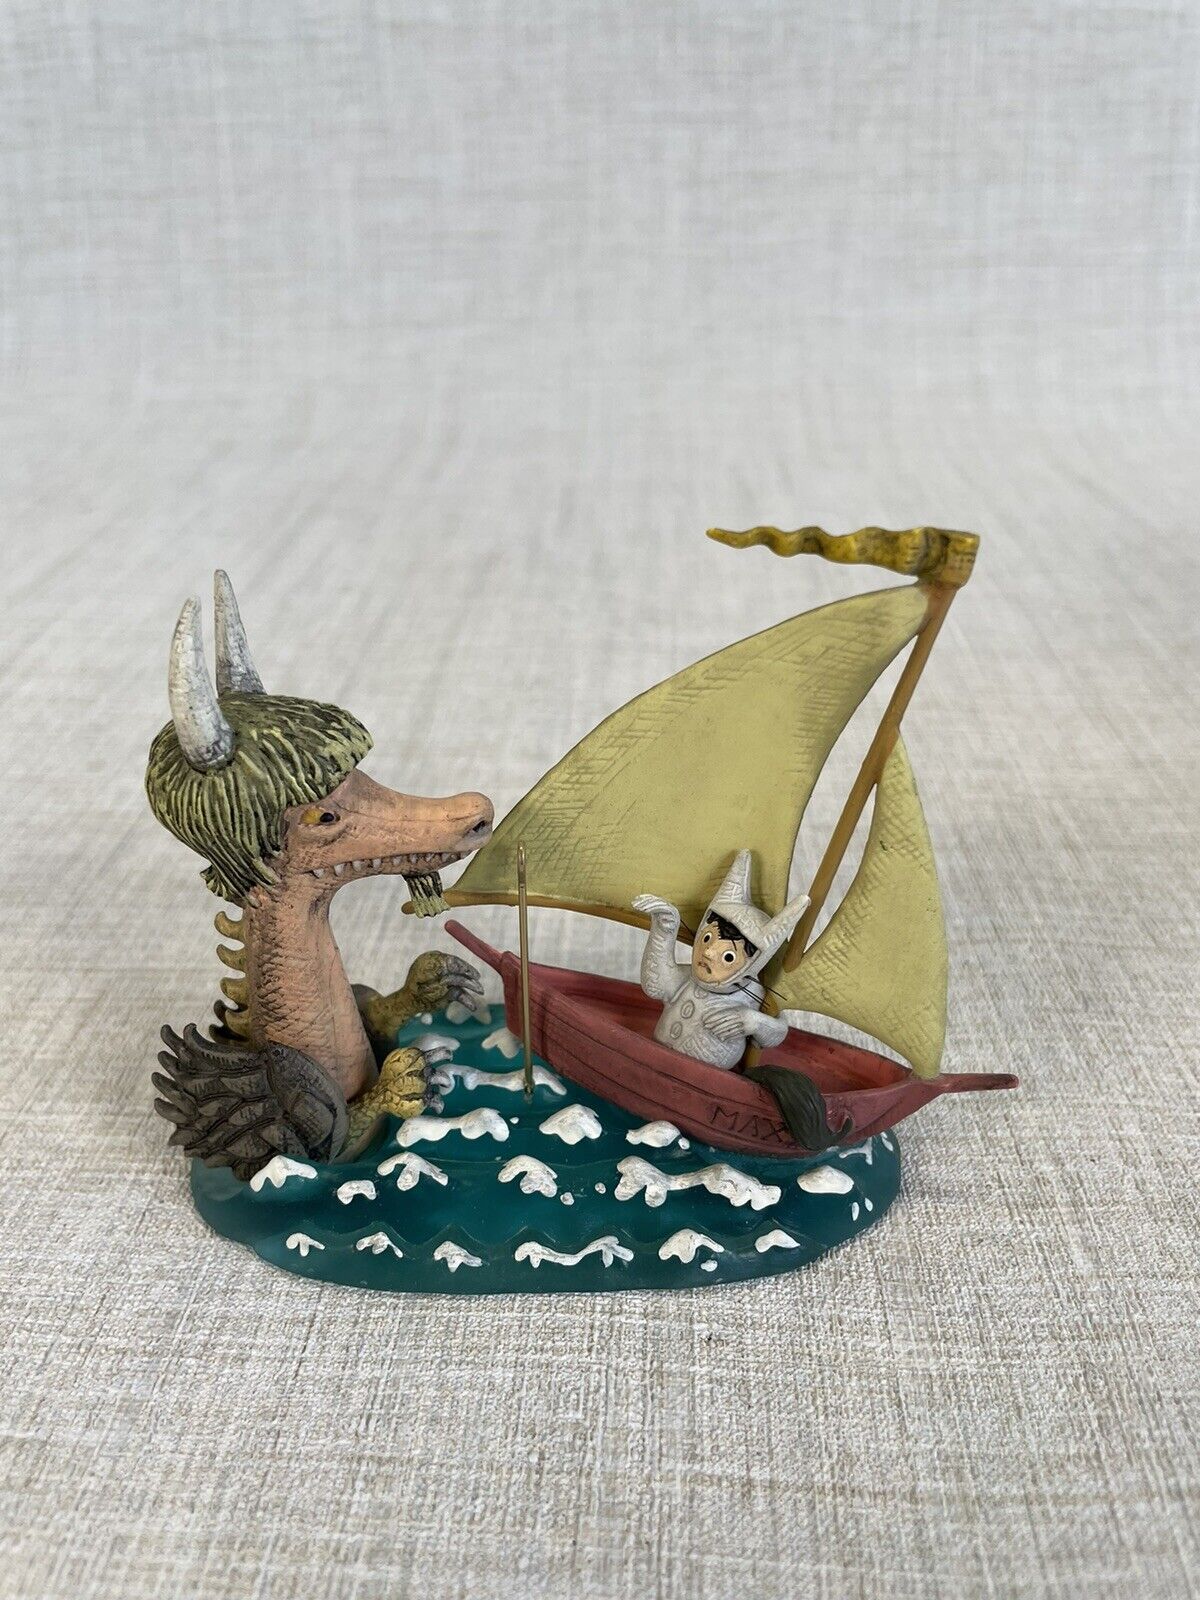 Hallmark Ornament 2010 Max Sets Sail Where The Wild Things Are